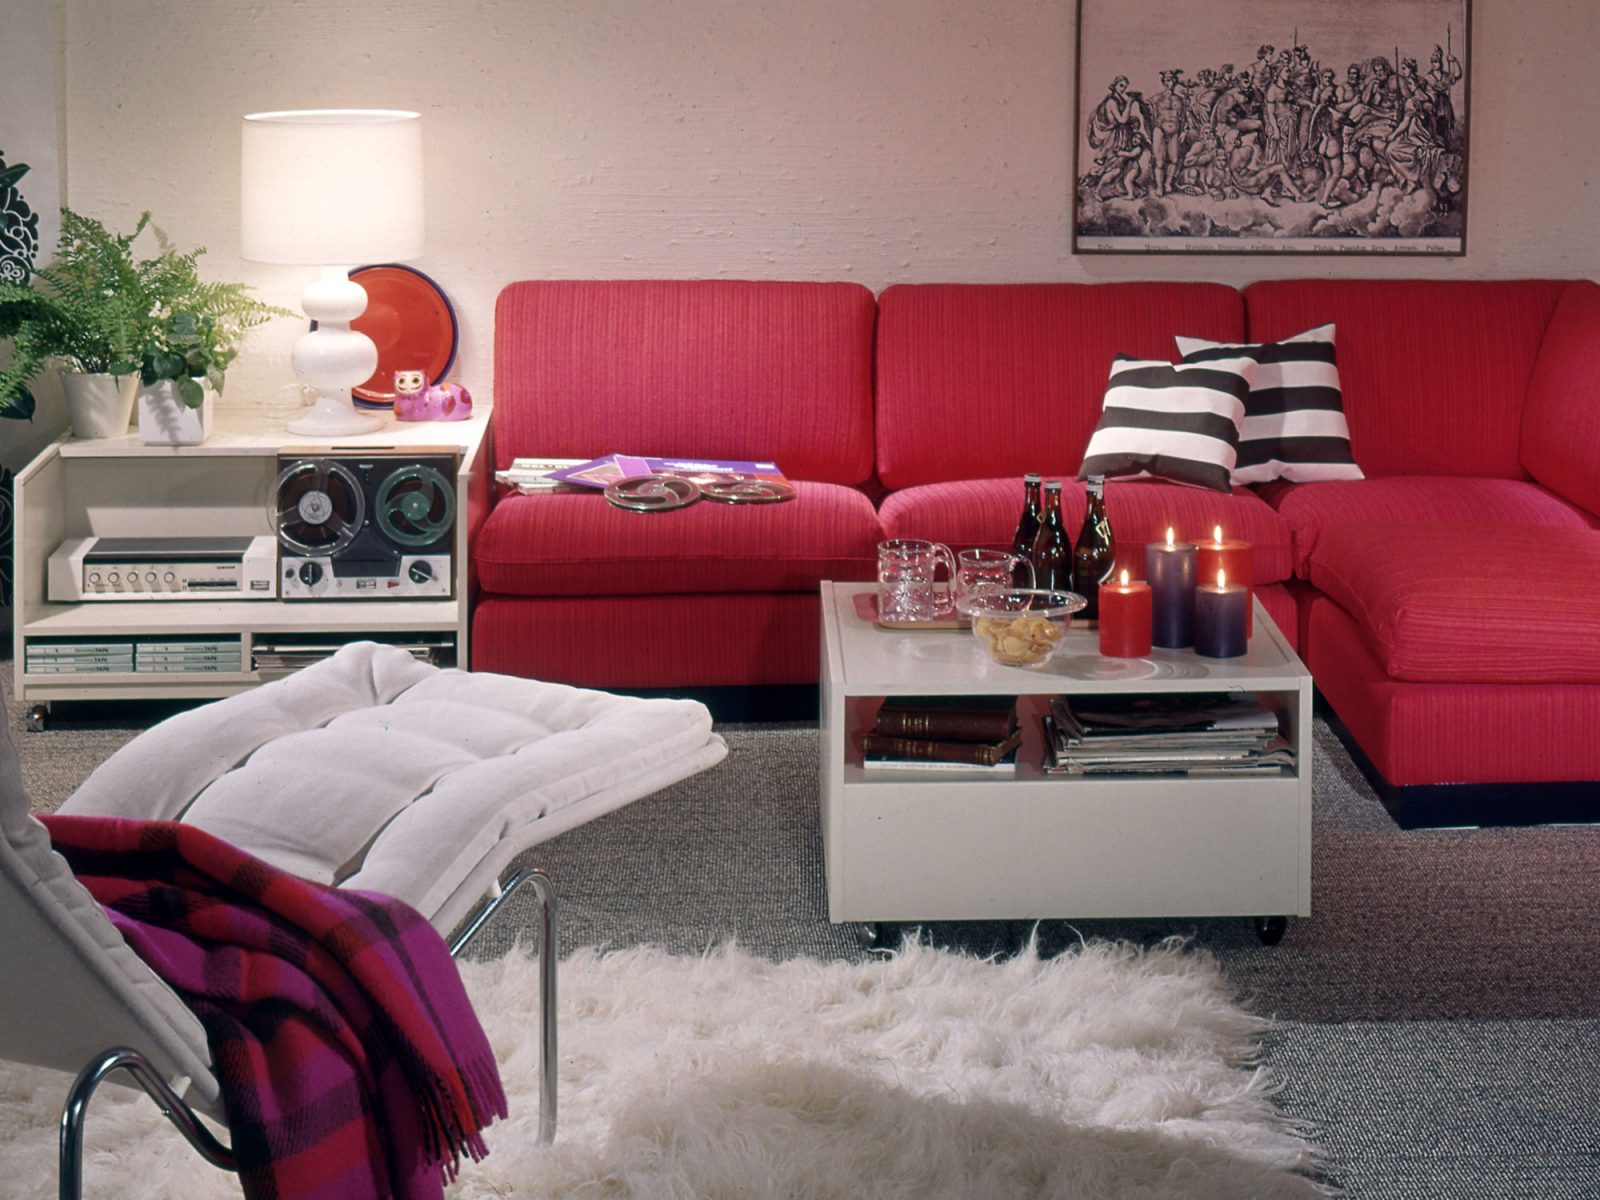 Interior from IKEA catalogue 1970, red sofa ZOOM, white carpet and lounge chair KRÖKEN, a stereo system in the background.